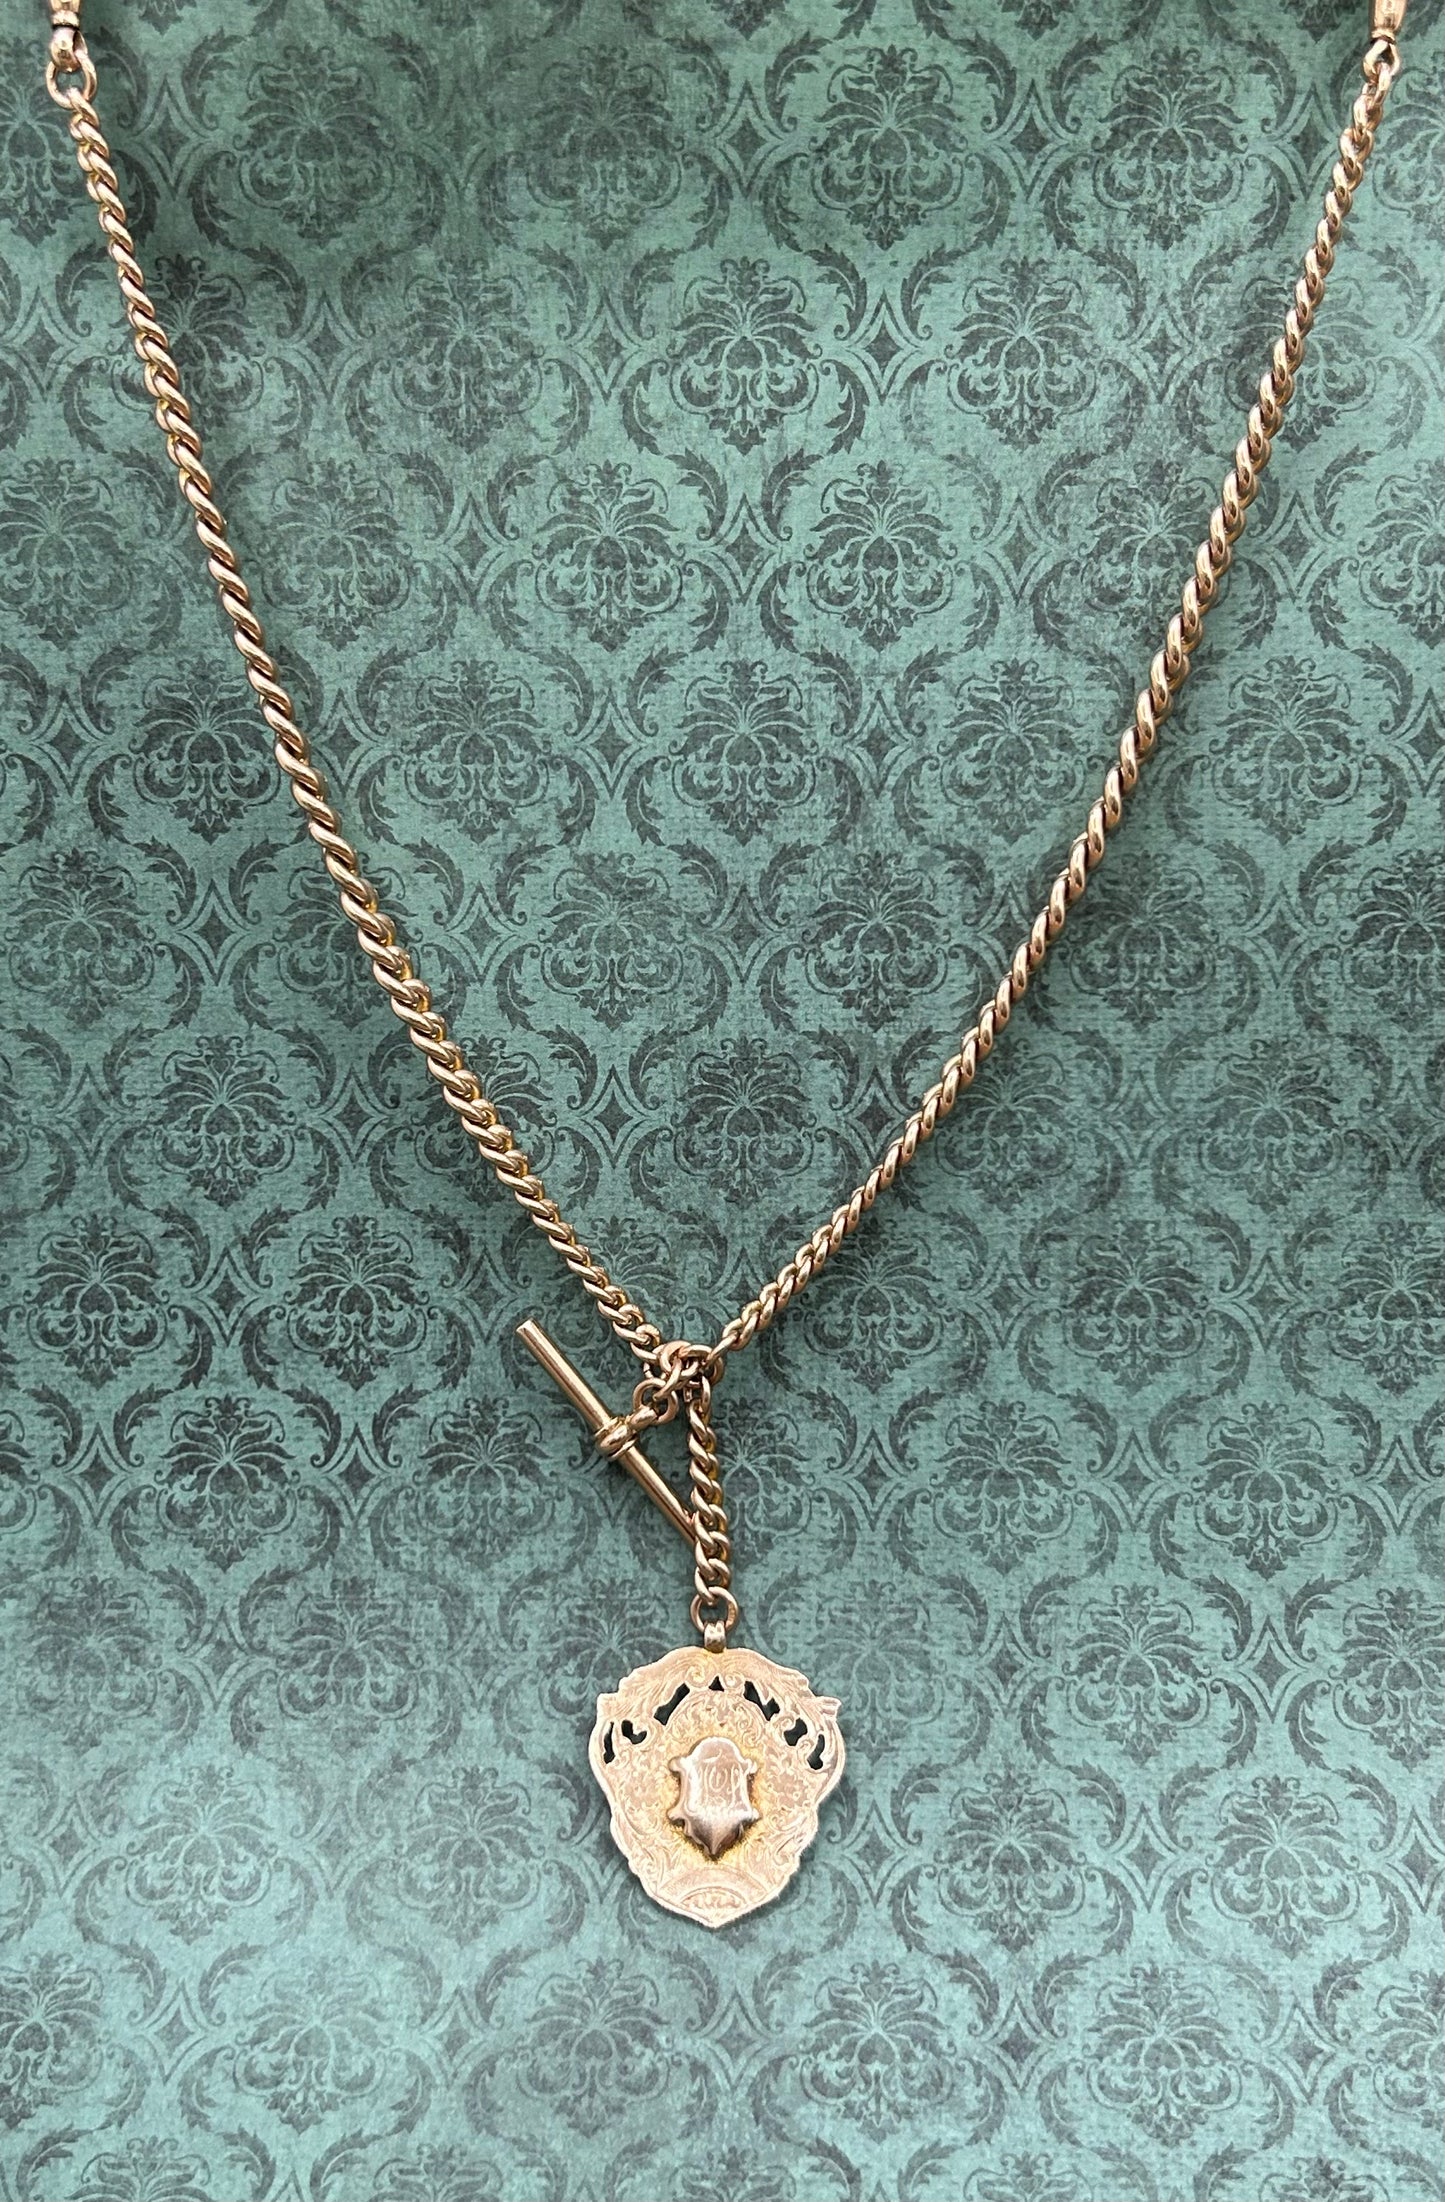 Antique 9ct Rose Gold Double Albert Watch Chain